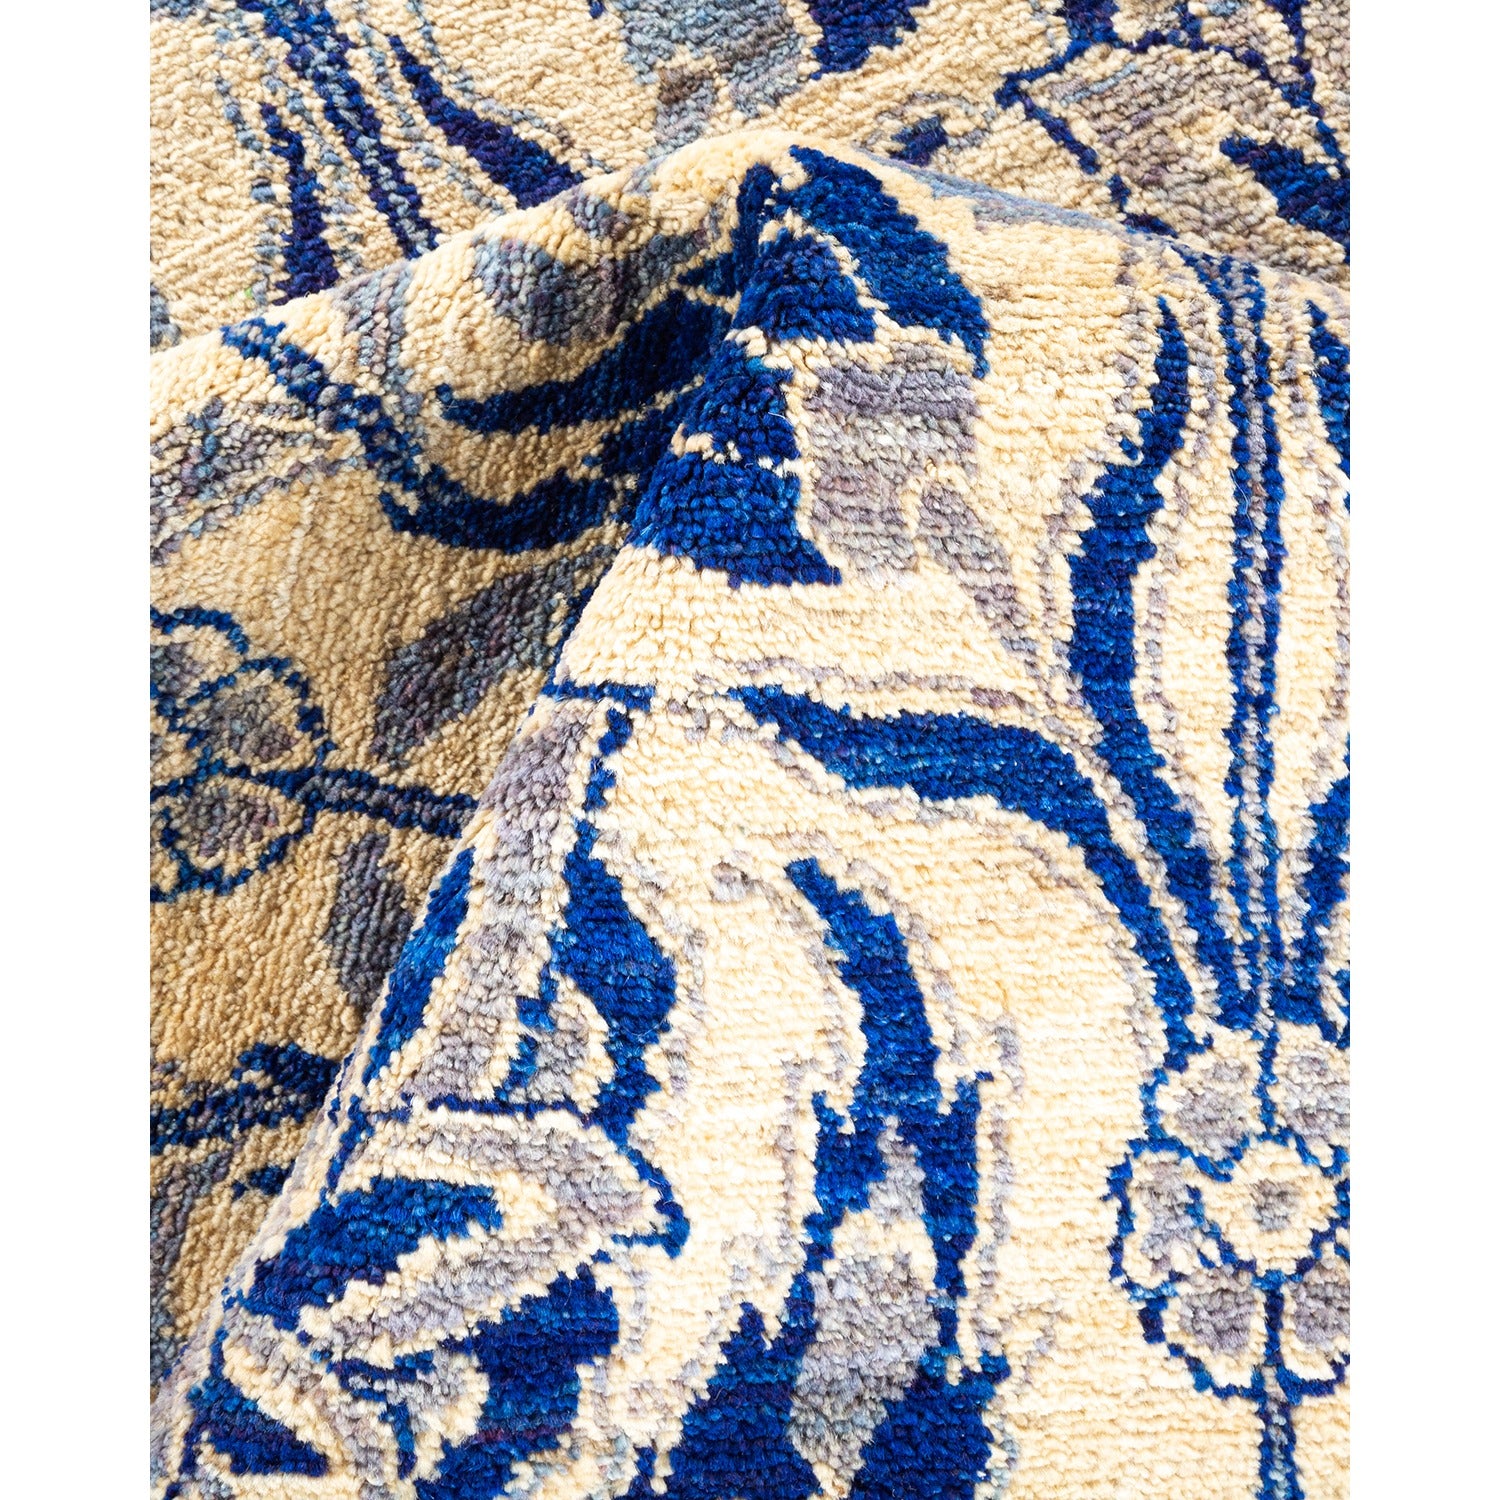 Folded patterned carpet with deep pile showcasing blue and beige.